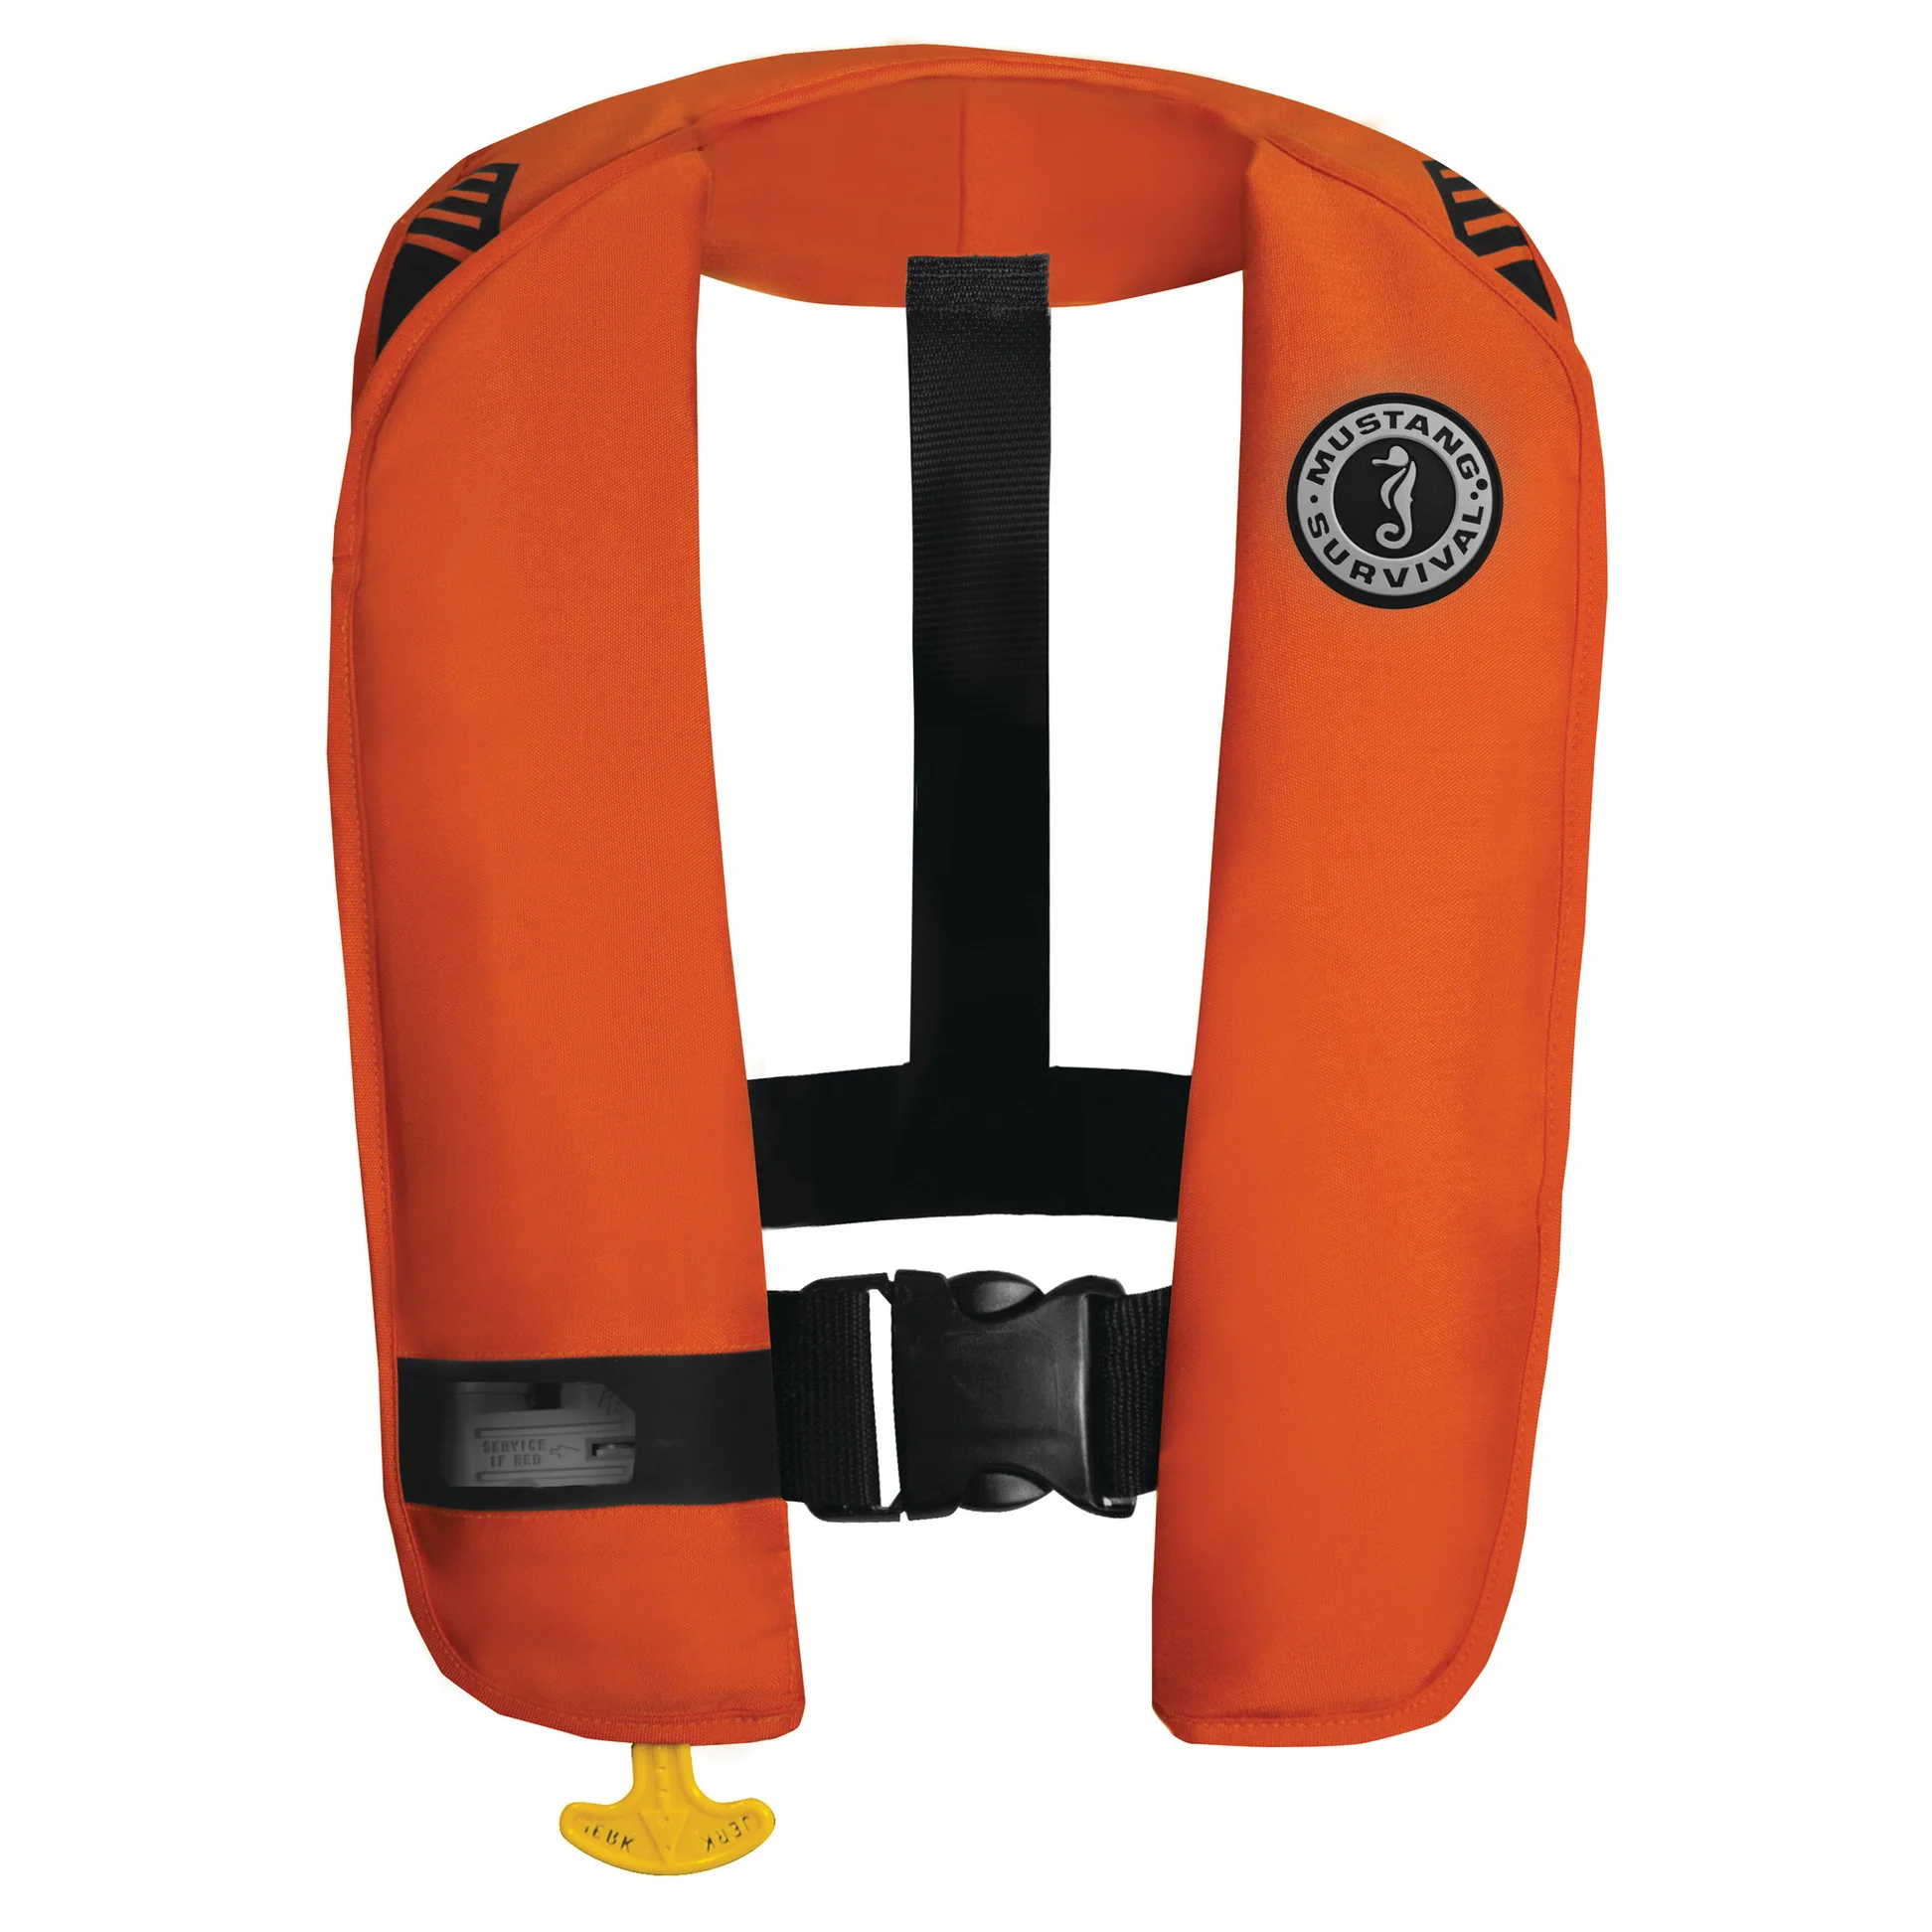 Mustang Survival MIT 100 Inflatable Life Jacket/PFD - MD2016T1-33-0